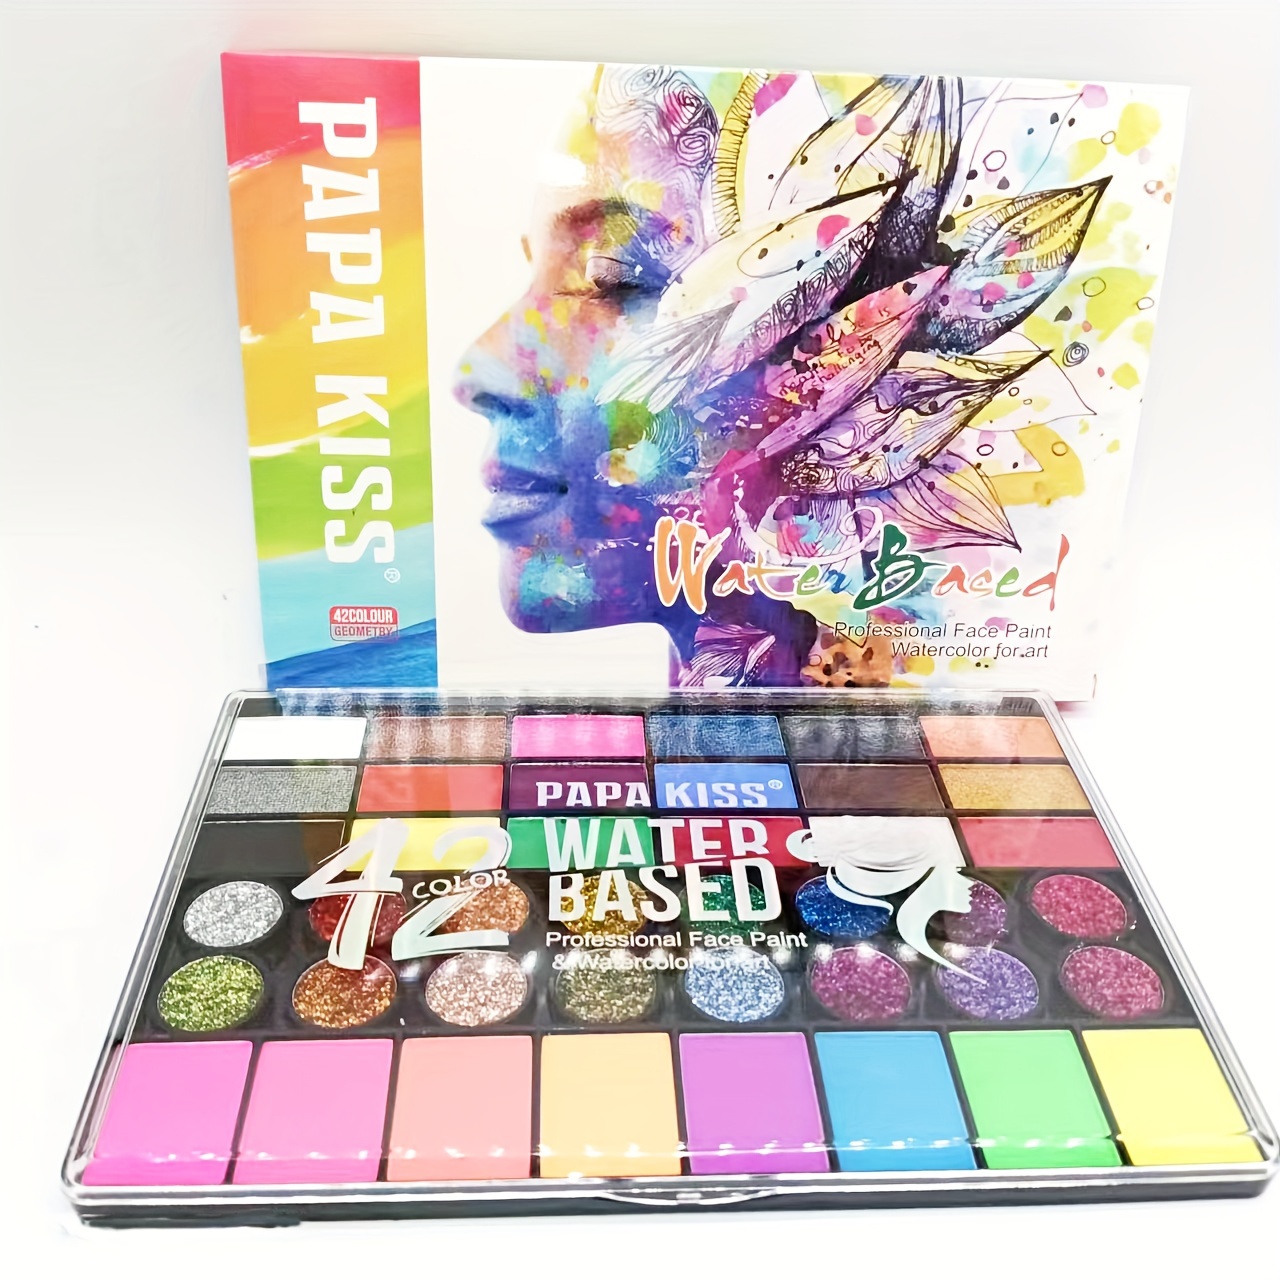 

42 Color Water-based Face Paint Set, Halloween & Christmas, Non-toxic Body Painting Palette, Makeup Kit With Glitter, Festive Face & Body Art Decor